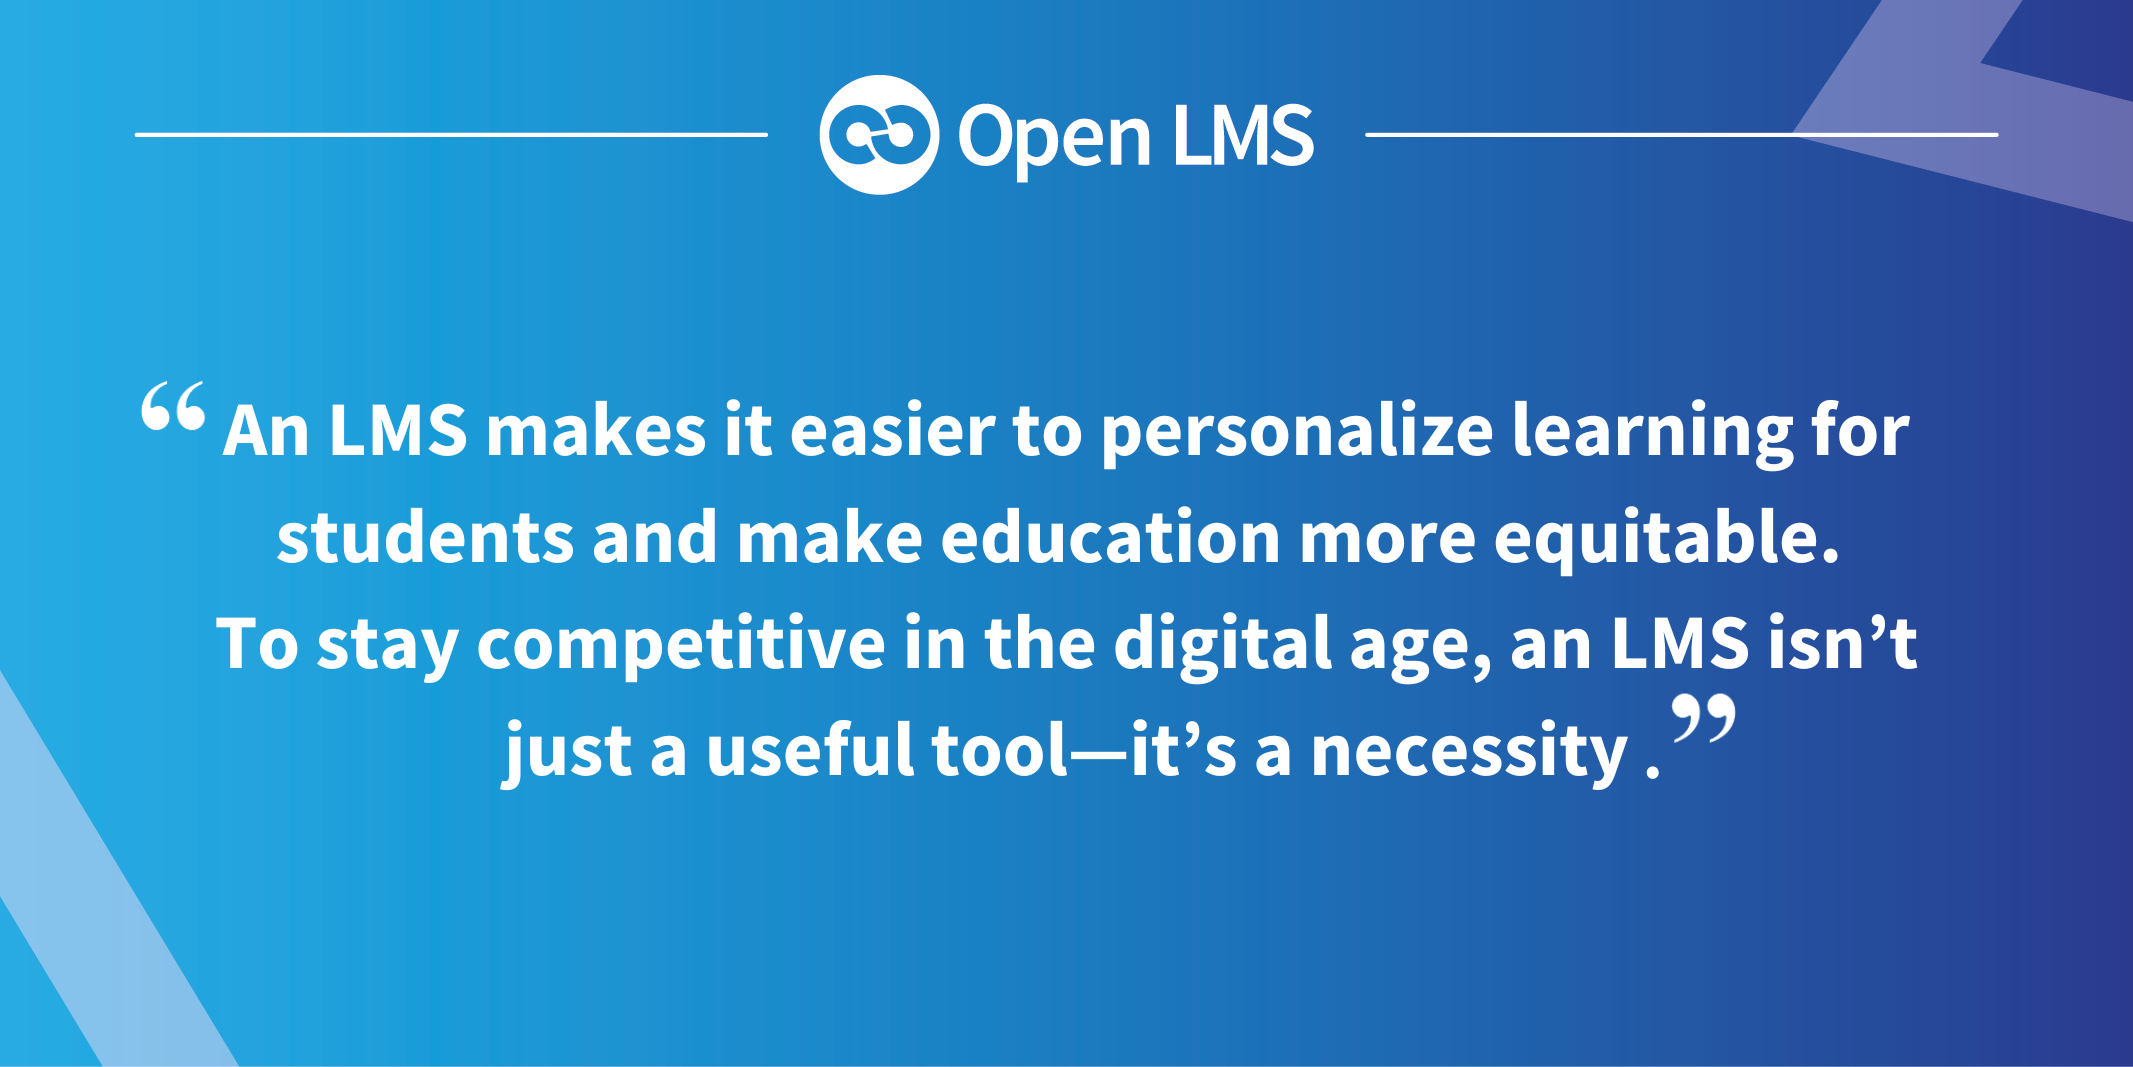 An LMS makes it easier to personalize learning for students and make education more equitable.  To stay competitive in the digital age, an LMS isn’t just a useful tool—it’s a necessity